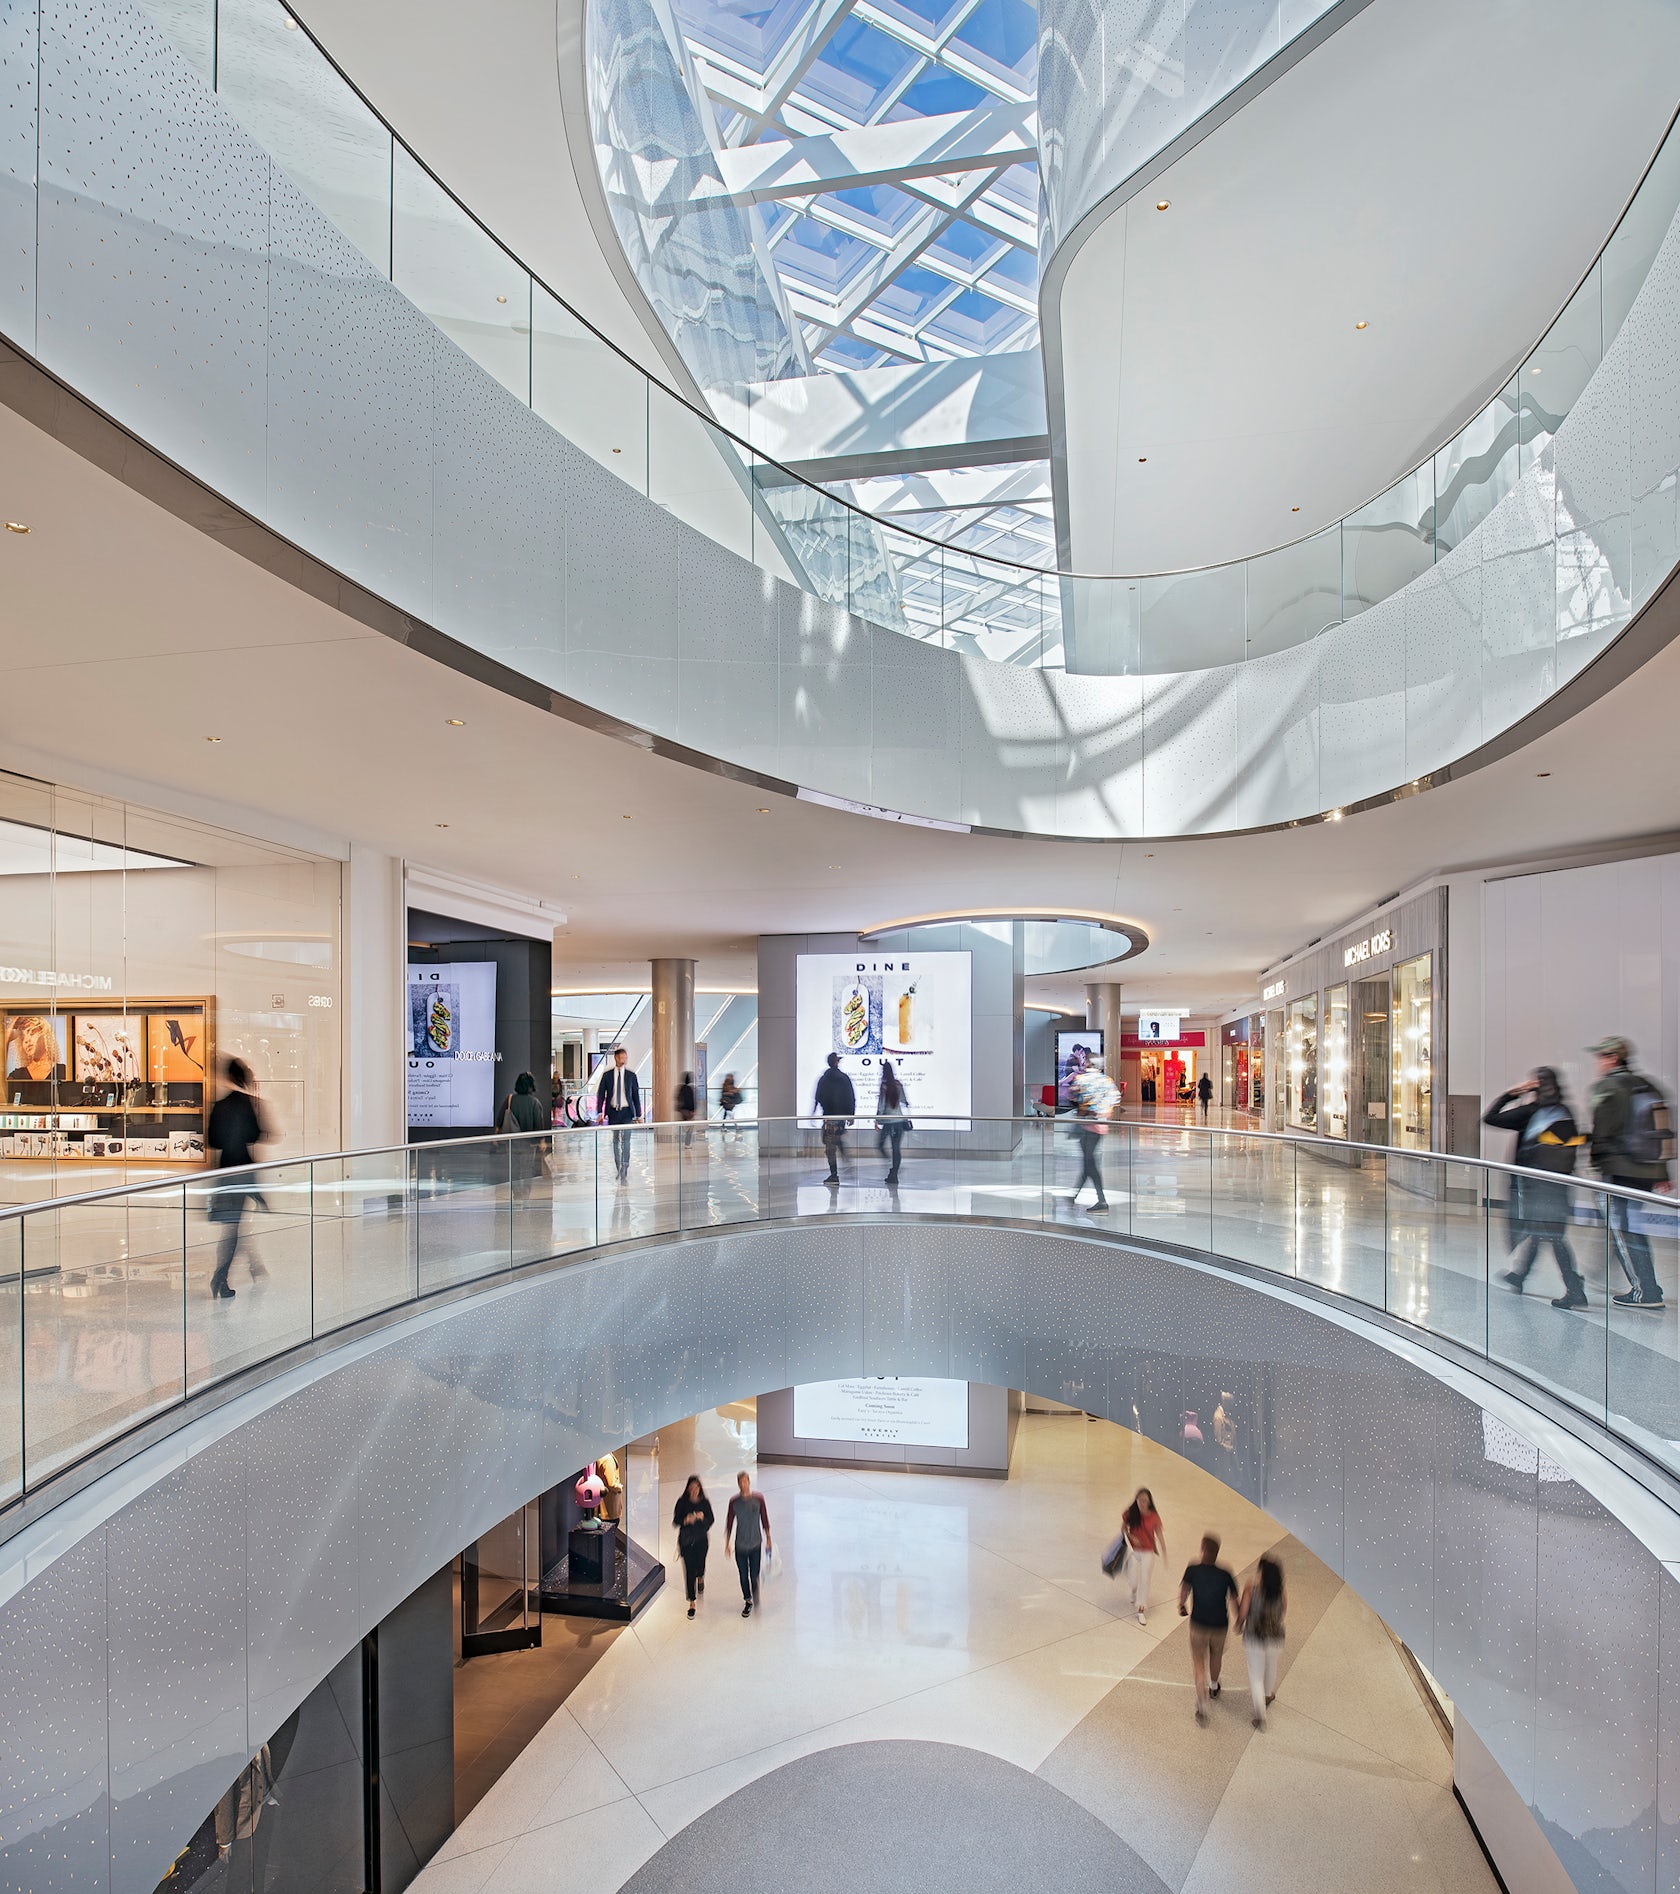 fuksas completes renovation of the beverly center in los angeles with a  dynamic wavy façade